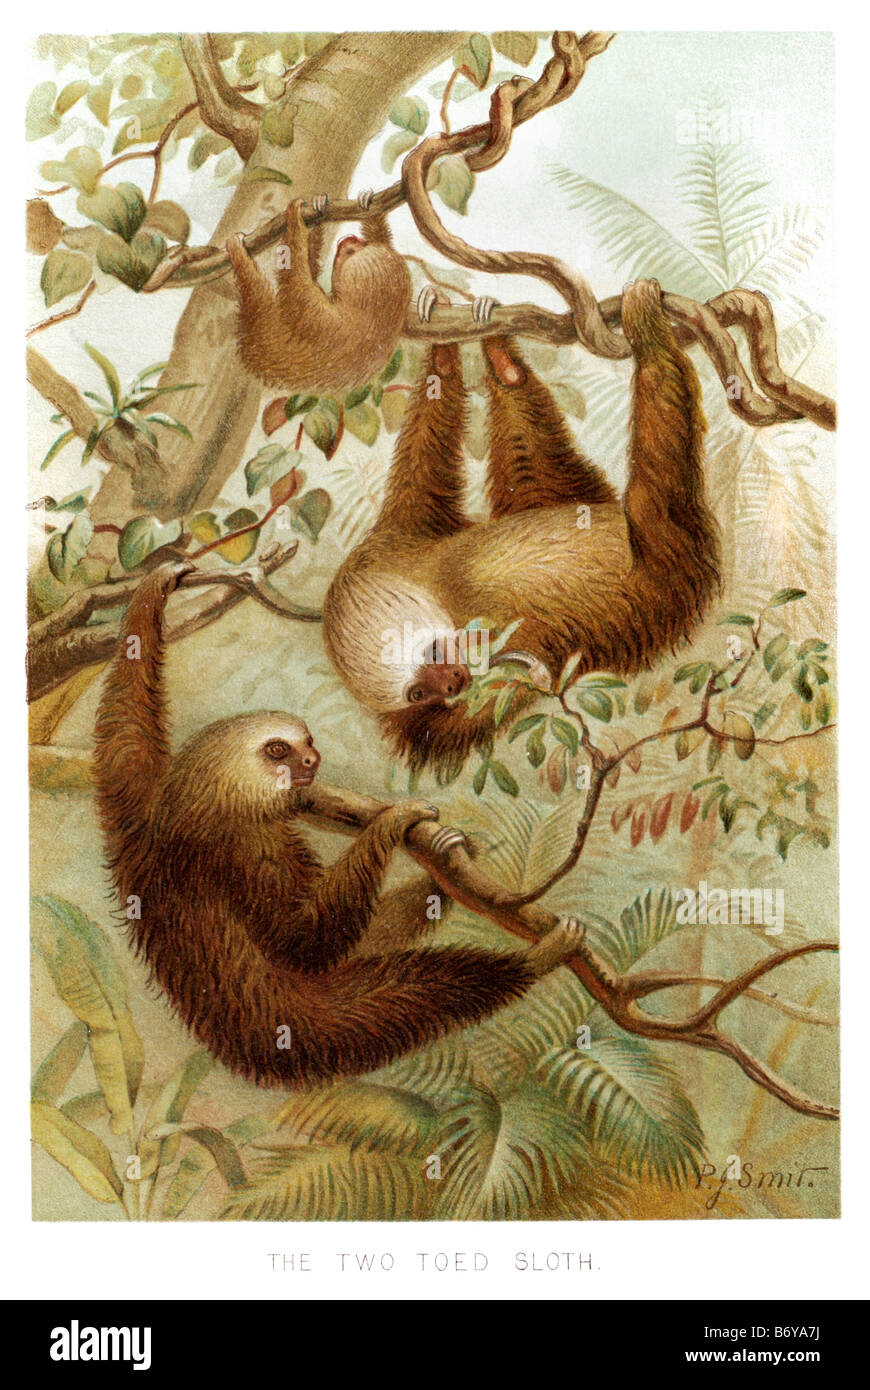 two toed sloth The living sloths comprise six species of medium-sized mammals that live in Central and South America belonging t Stock Photo